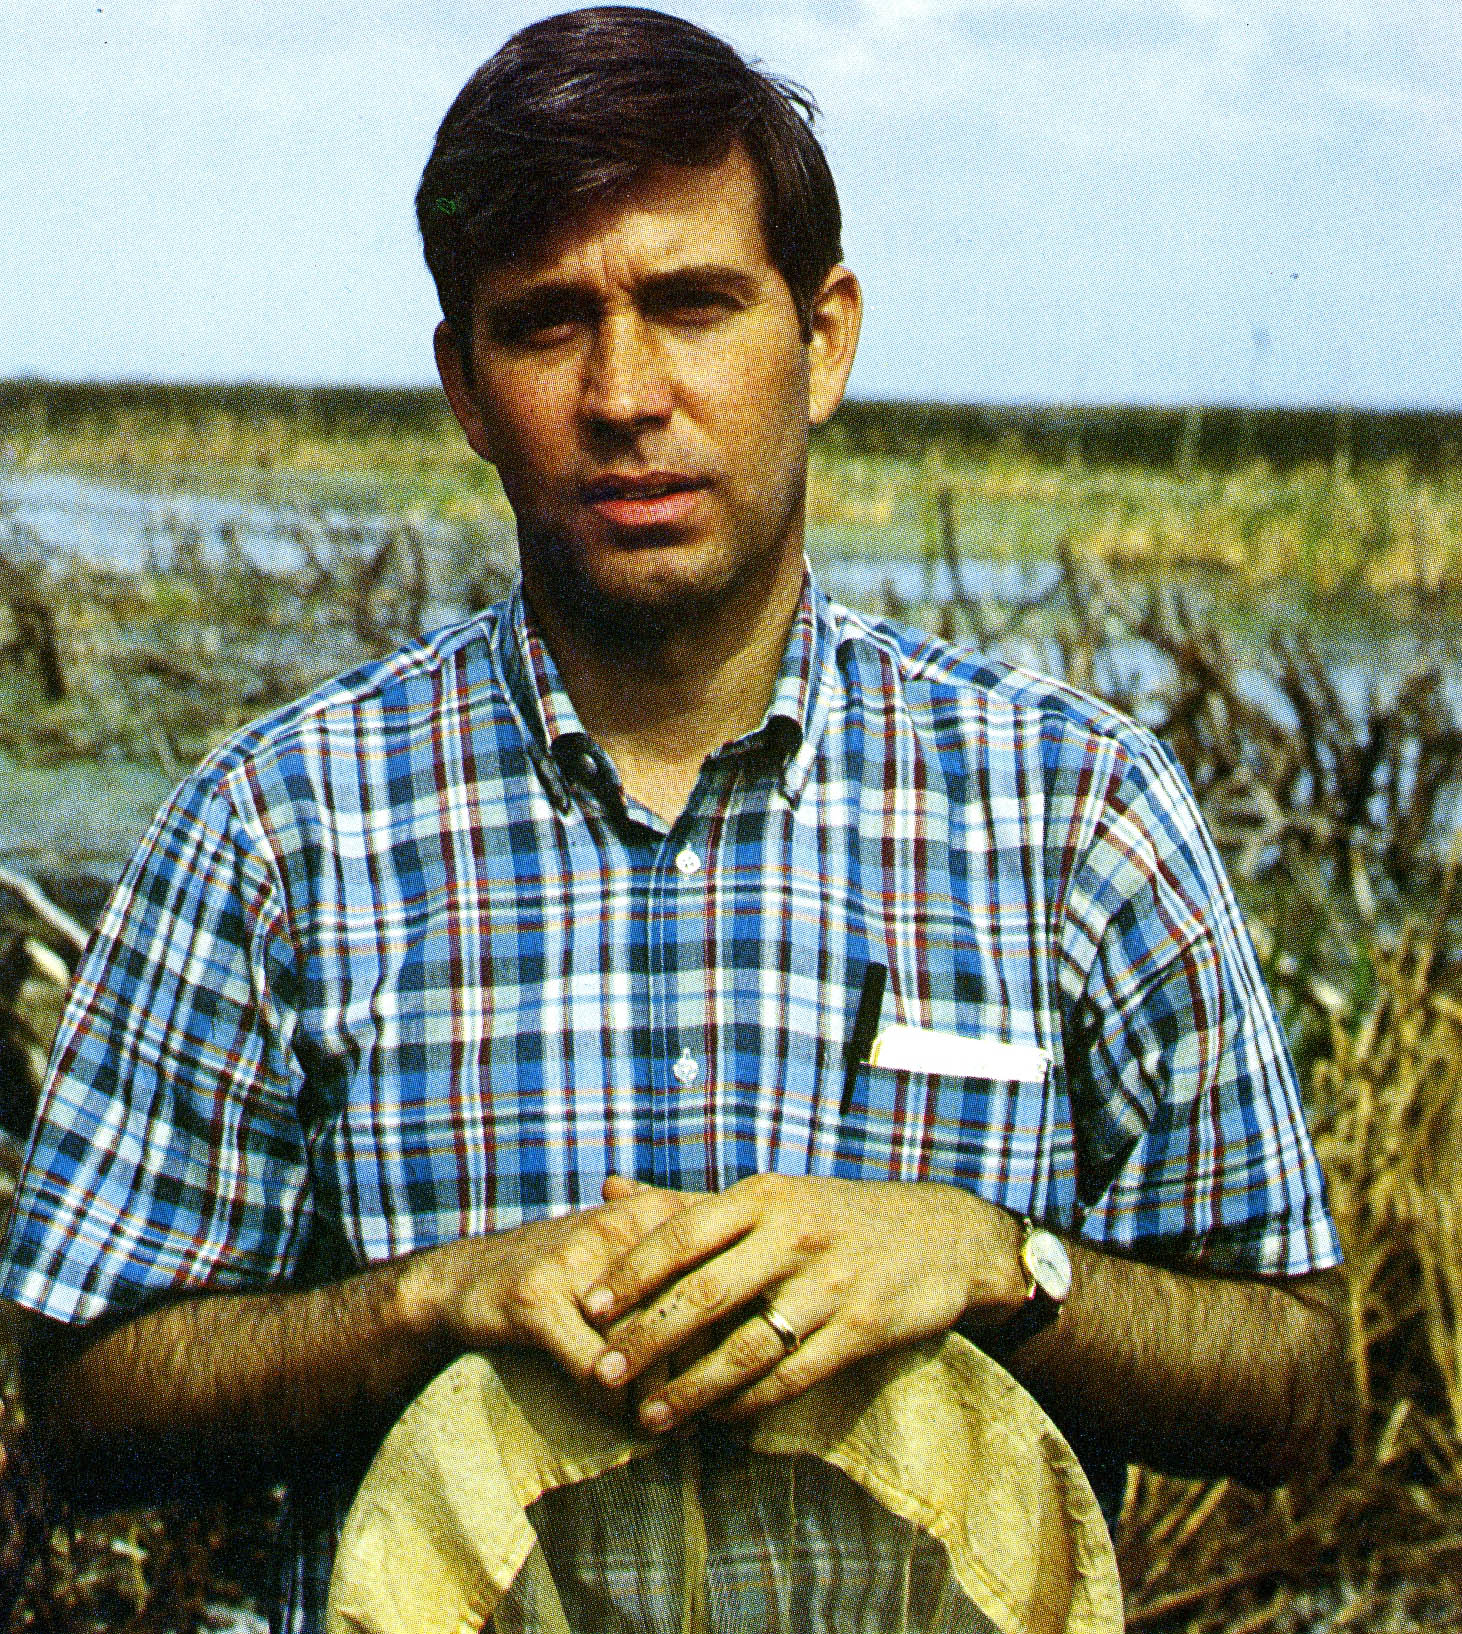 Rudy in the 1980s in the Everglades, Florida.
